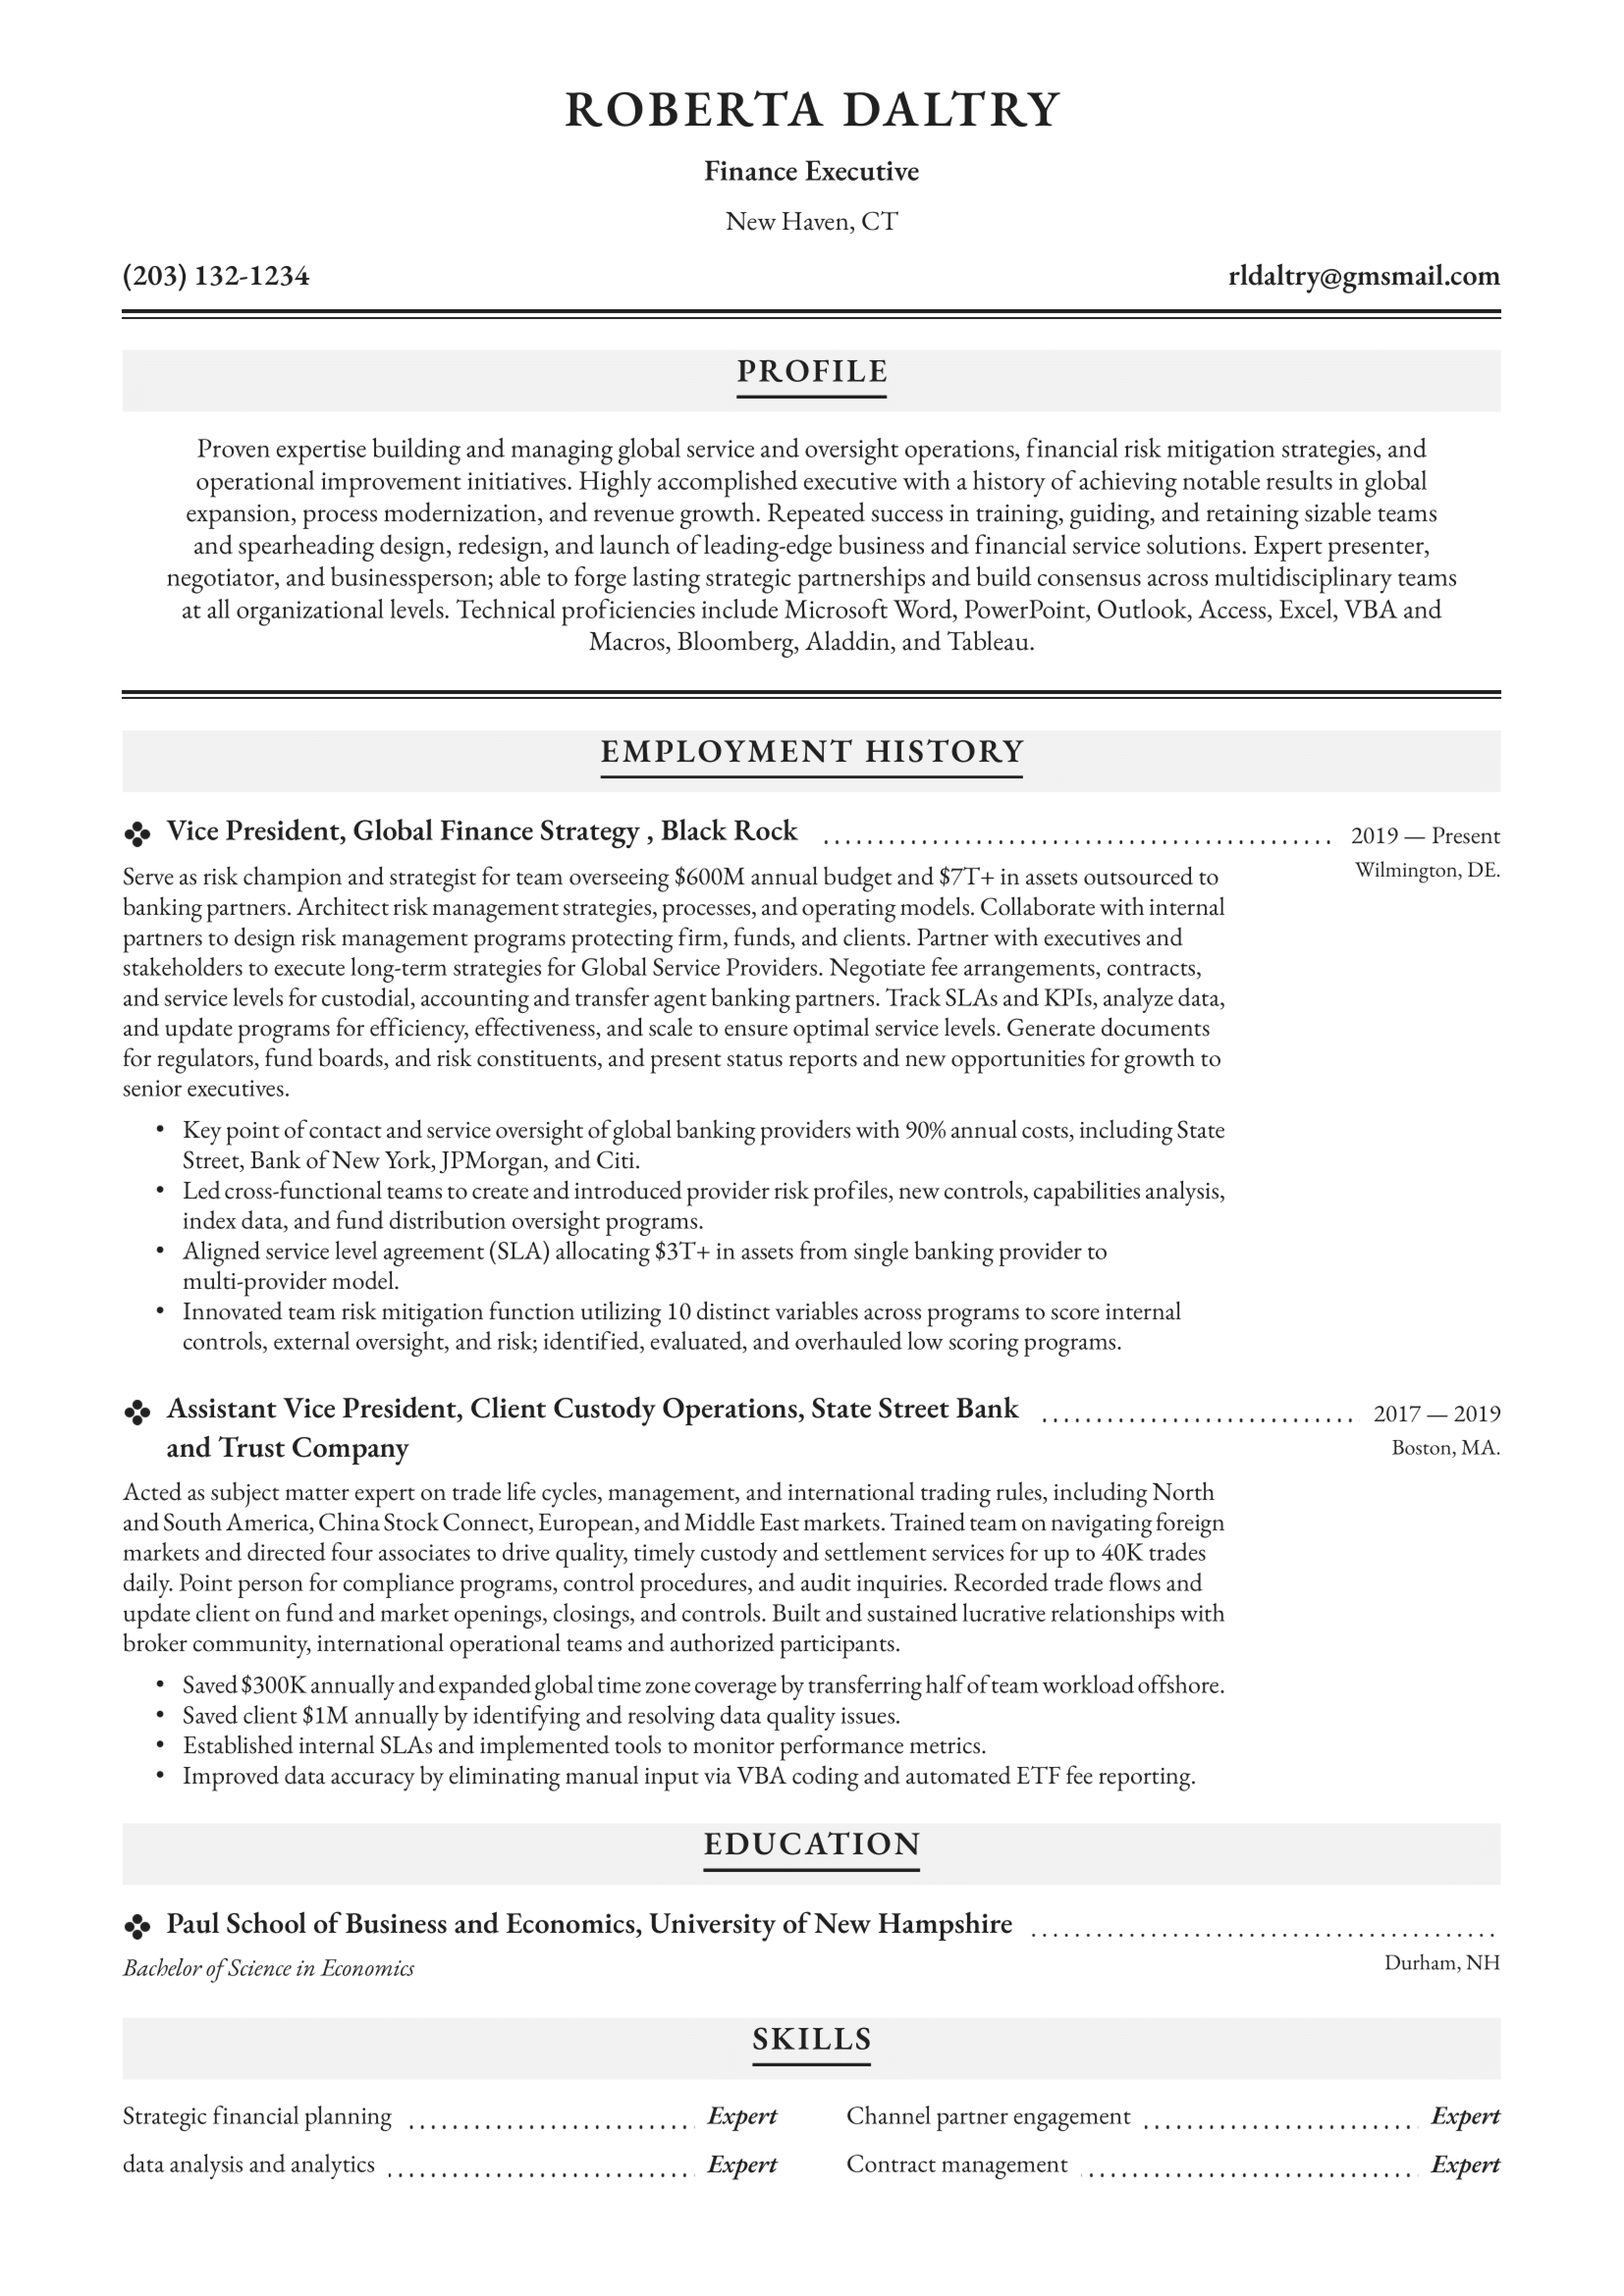 finance-executive-resume-example.png